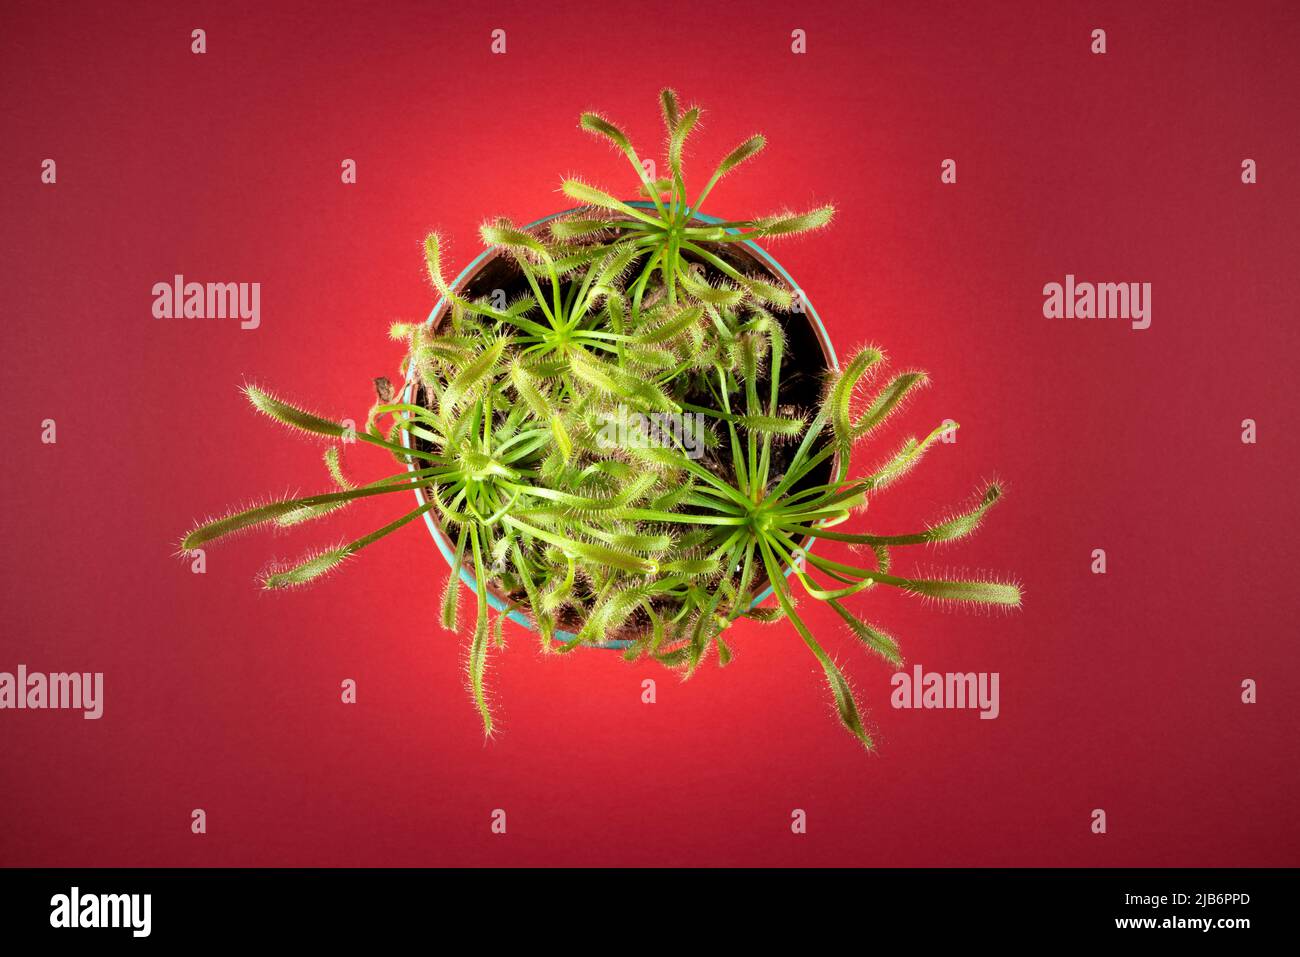 Drosera capensis (Cape sundew). Top view of a carnivorous plant in a round pot. Floral background with copy space. Stock Photo